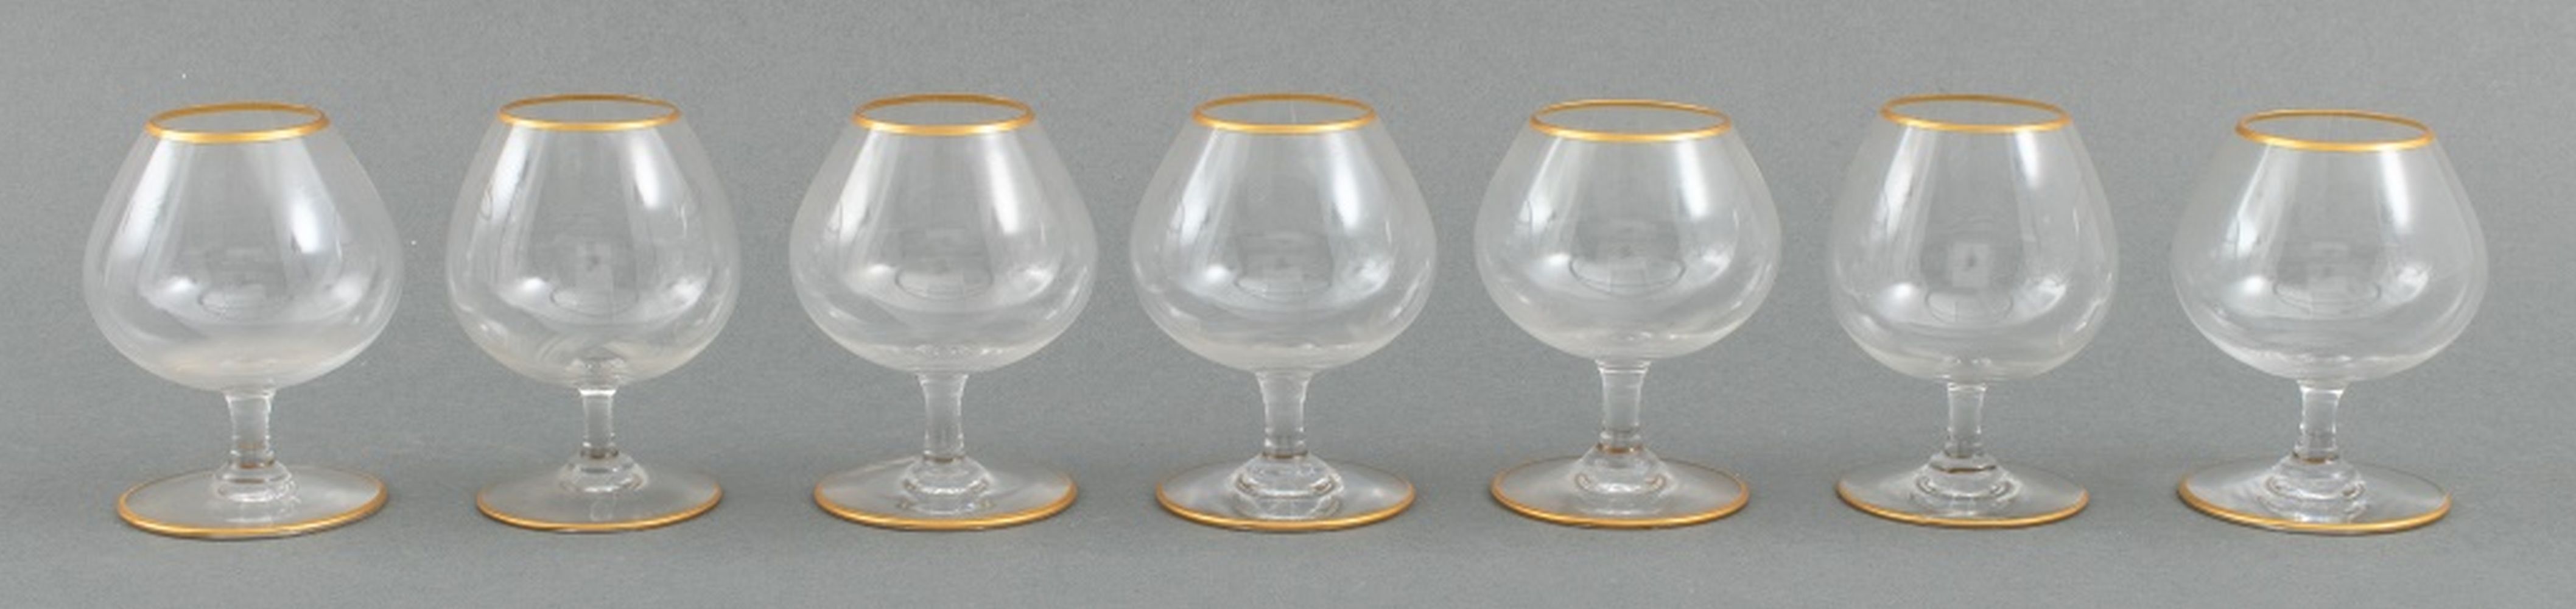 BACCARAT CRYSTAL SNIFTER GLASSES 2bbc96